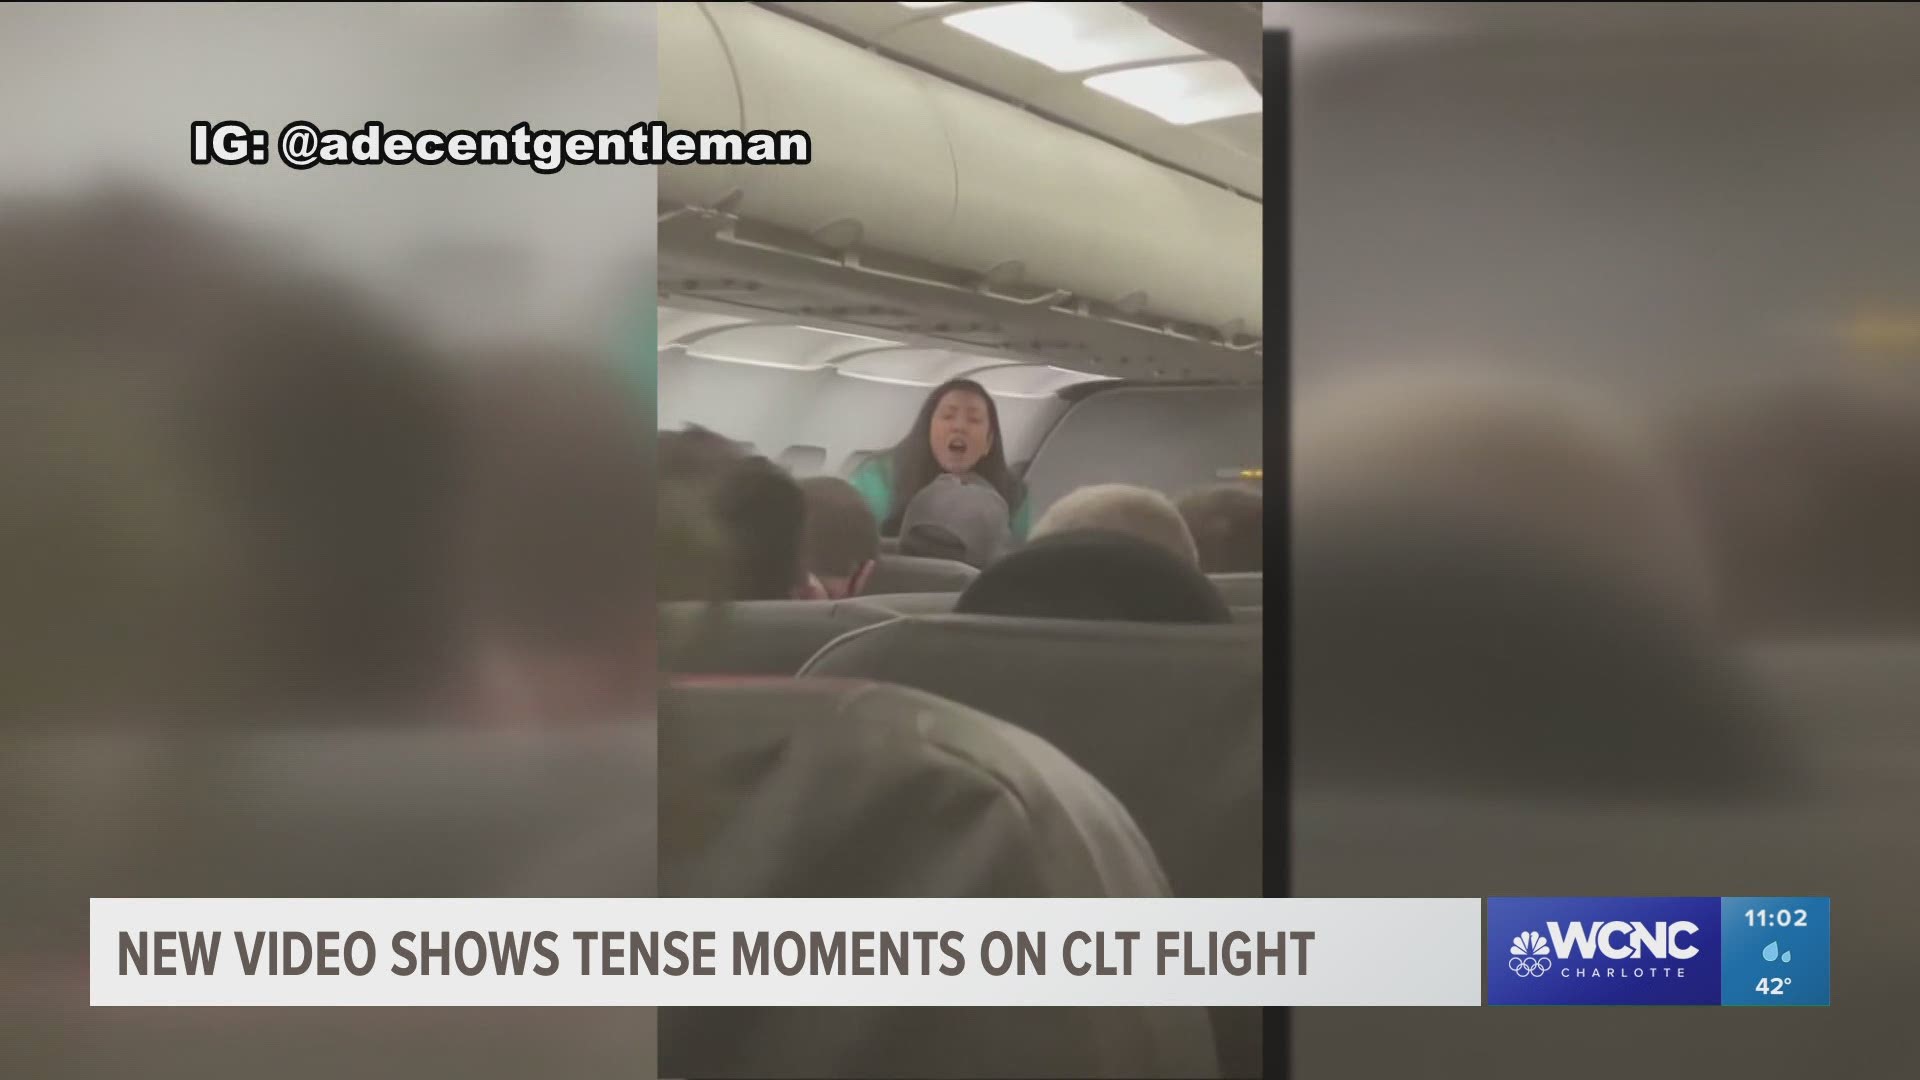 An outburst on an American Airlines flight from Charlotte to Washington, D.C. was caught on camera after a passenger refused to comply with face mask requirements.